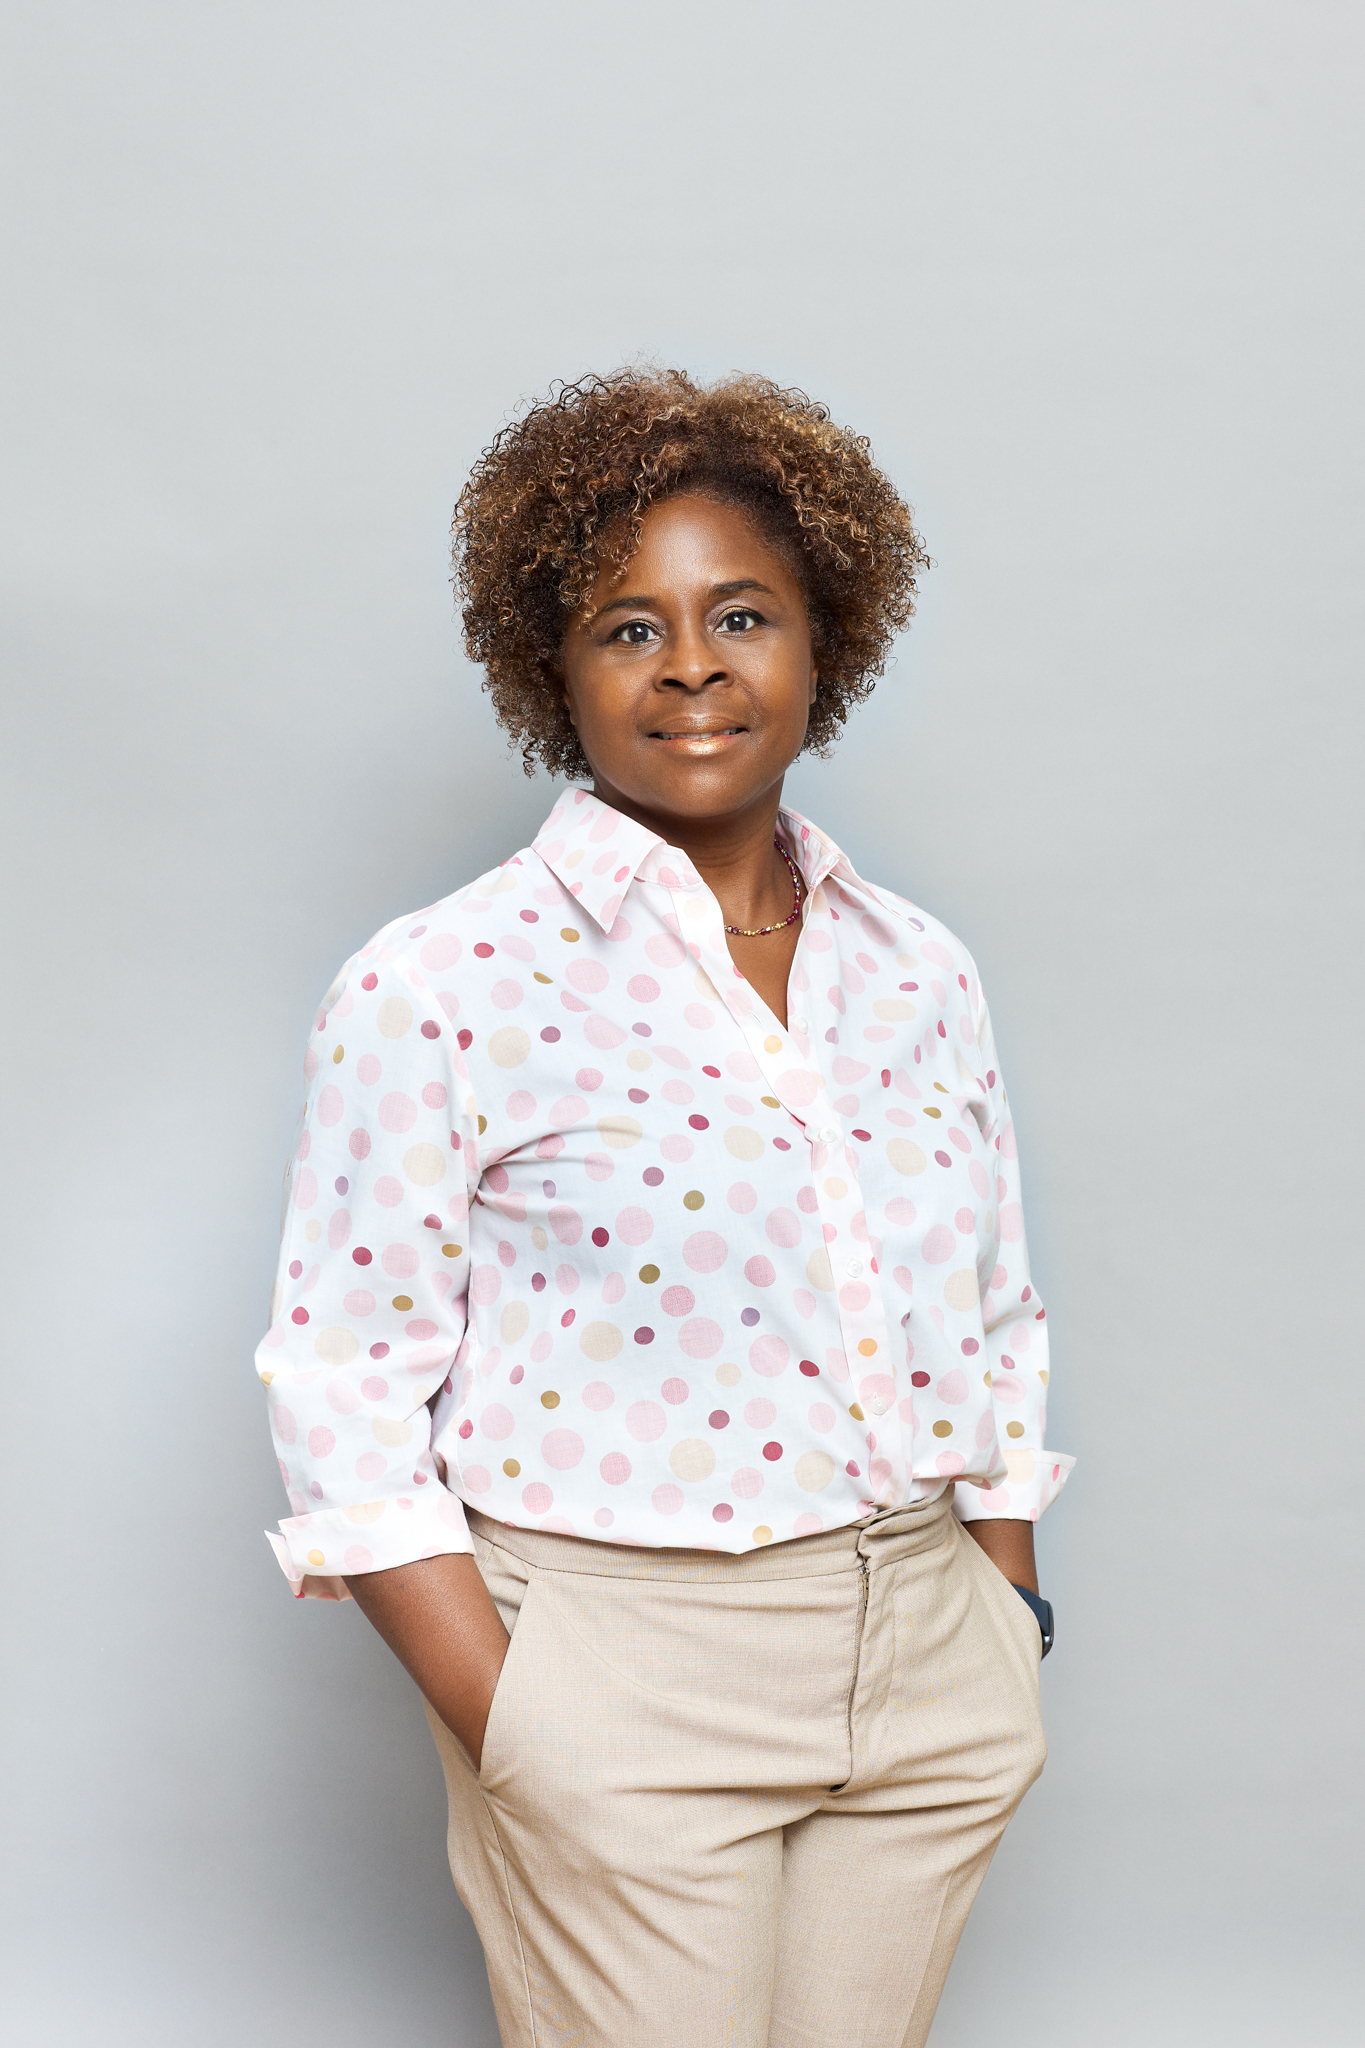 A black woman in a polka dot shirt and tan pants captured through event photography.